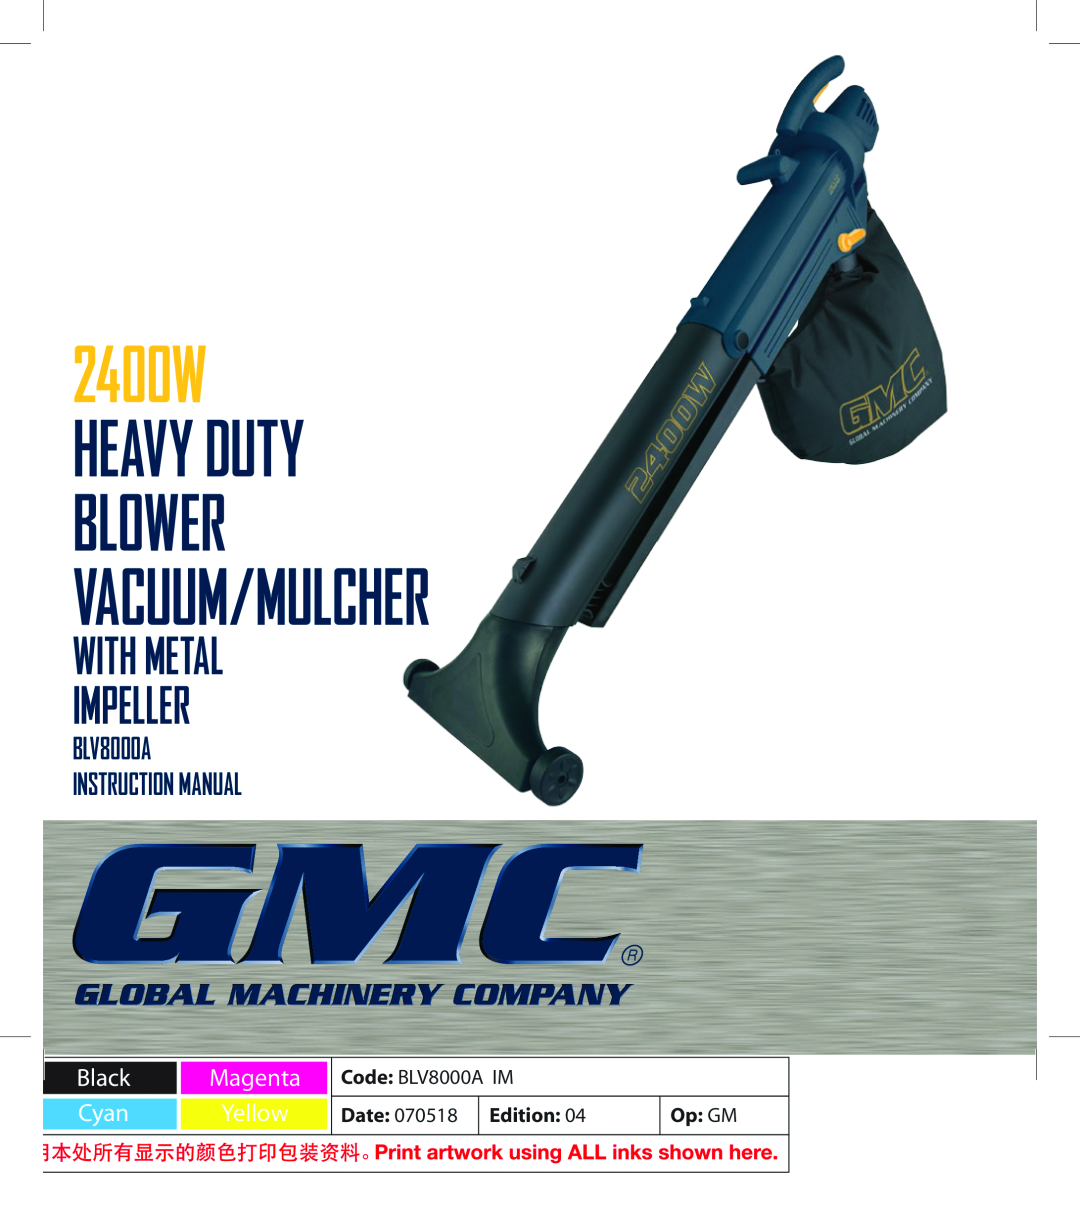 Global Machinery Company BLV8000A instruction manual With Metal Impeller, 2400W HEAVY DUTY BLOWER VACUUM/MULCHER 